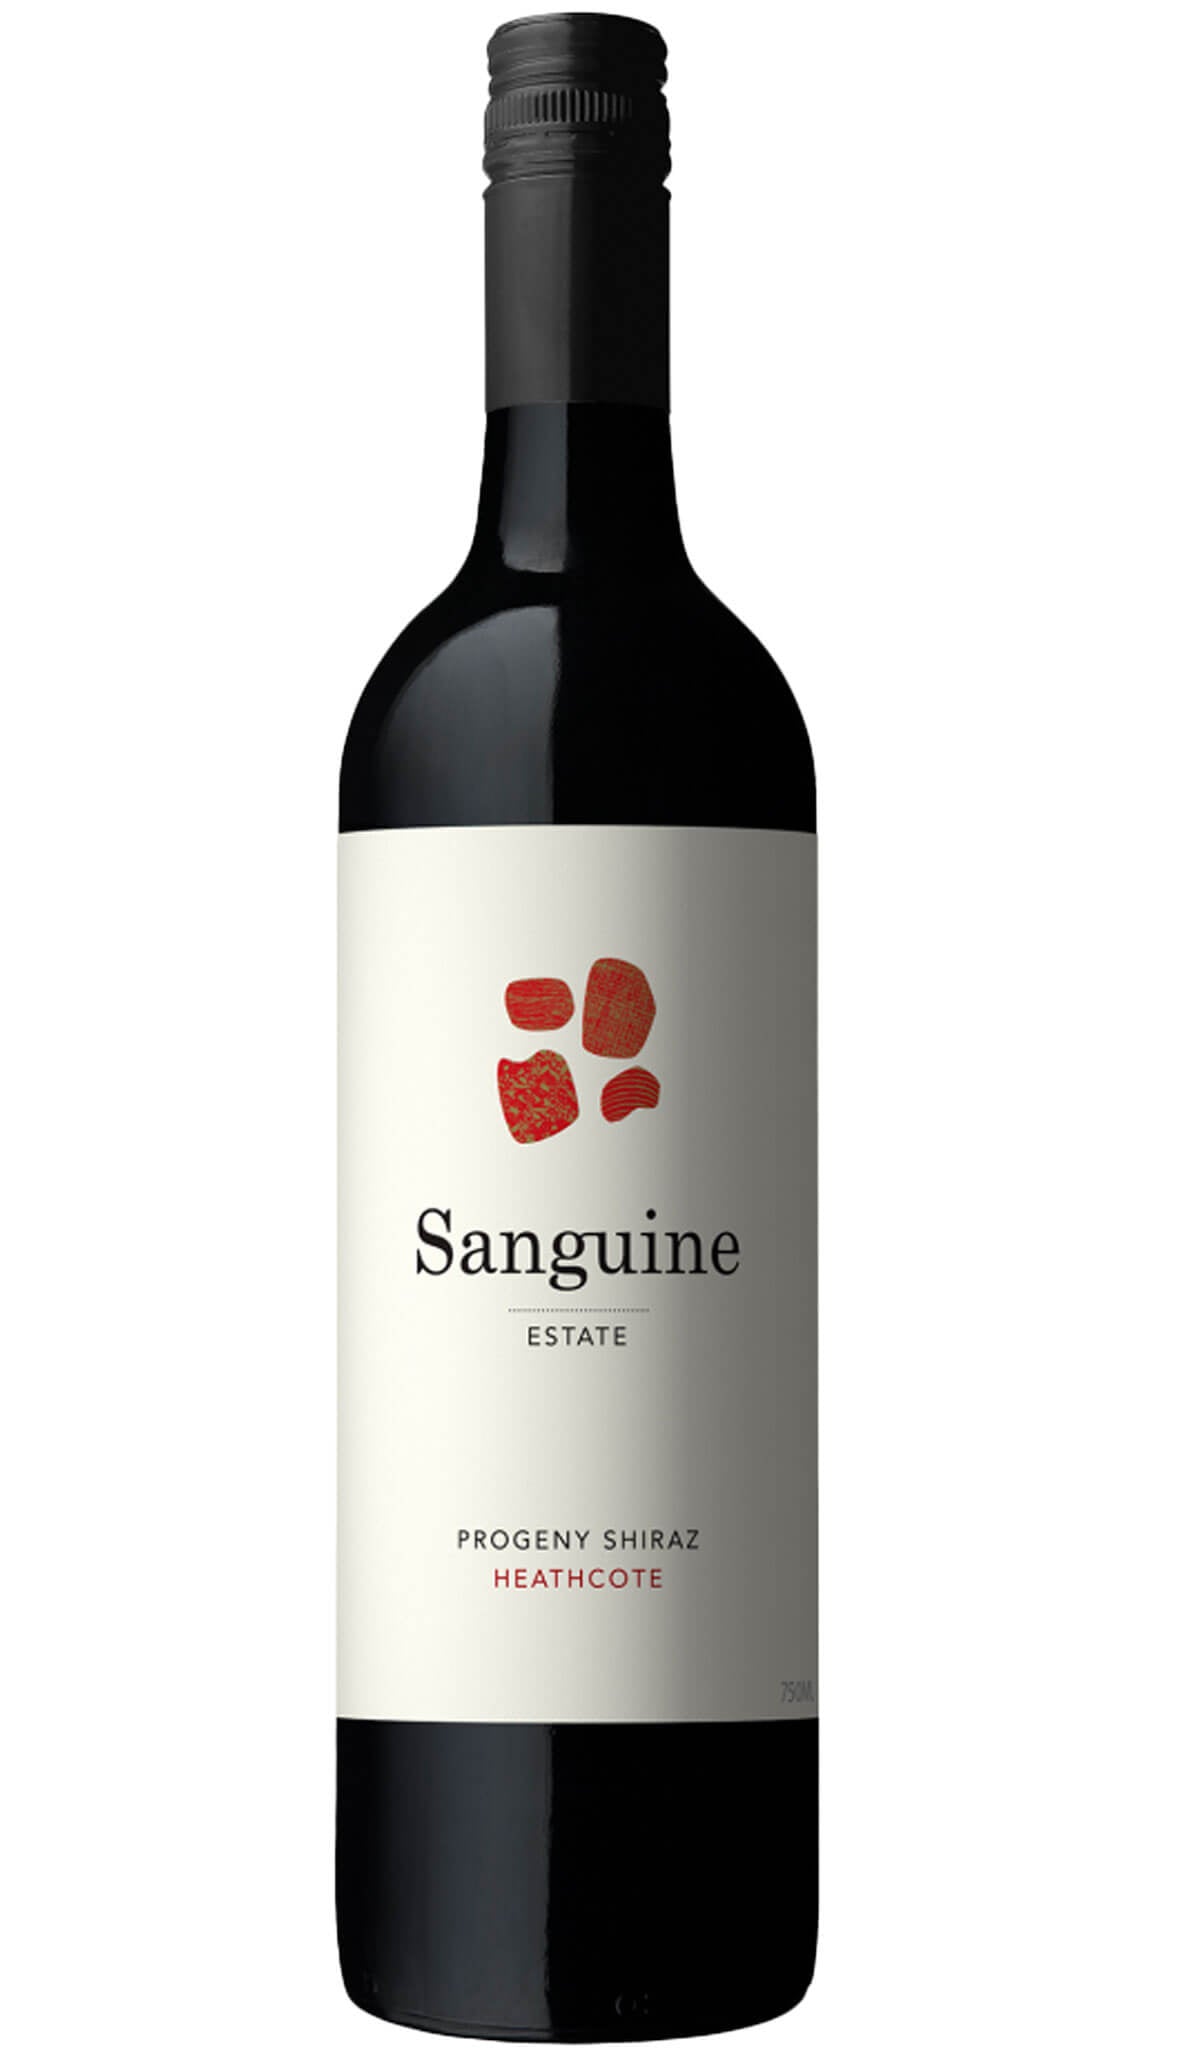 Find out more or buy Sanguine Progeny Shiraz 2022 (Heathcote) online at Wine Sellers Direct - Australia’s independent liquor specialists.